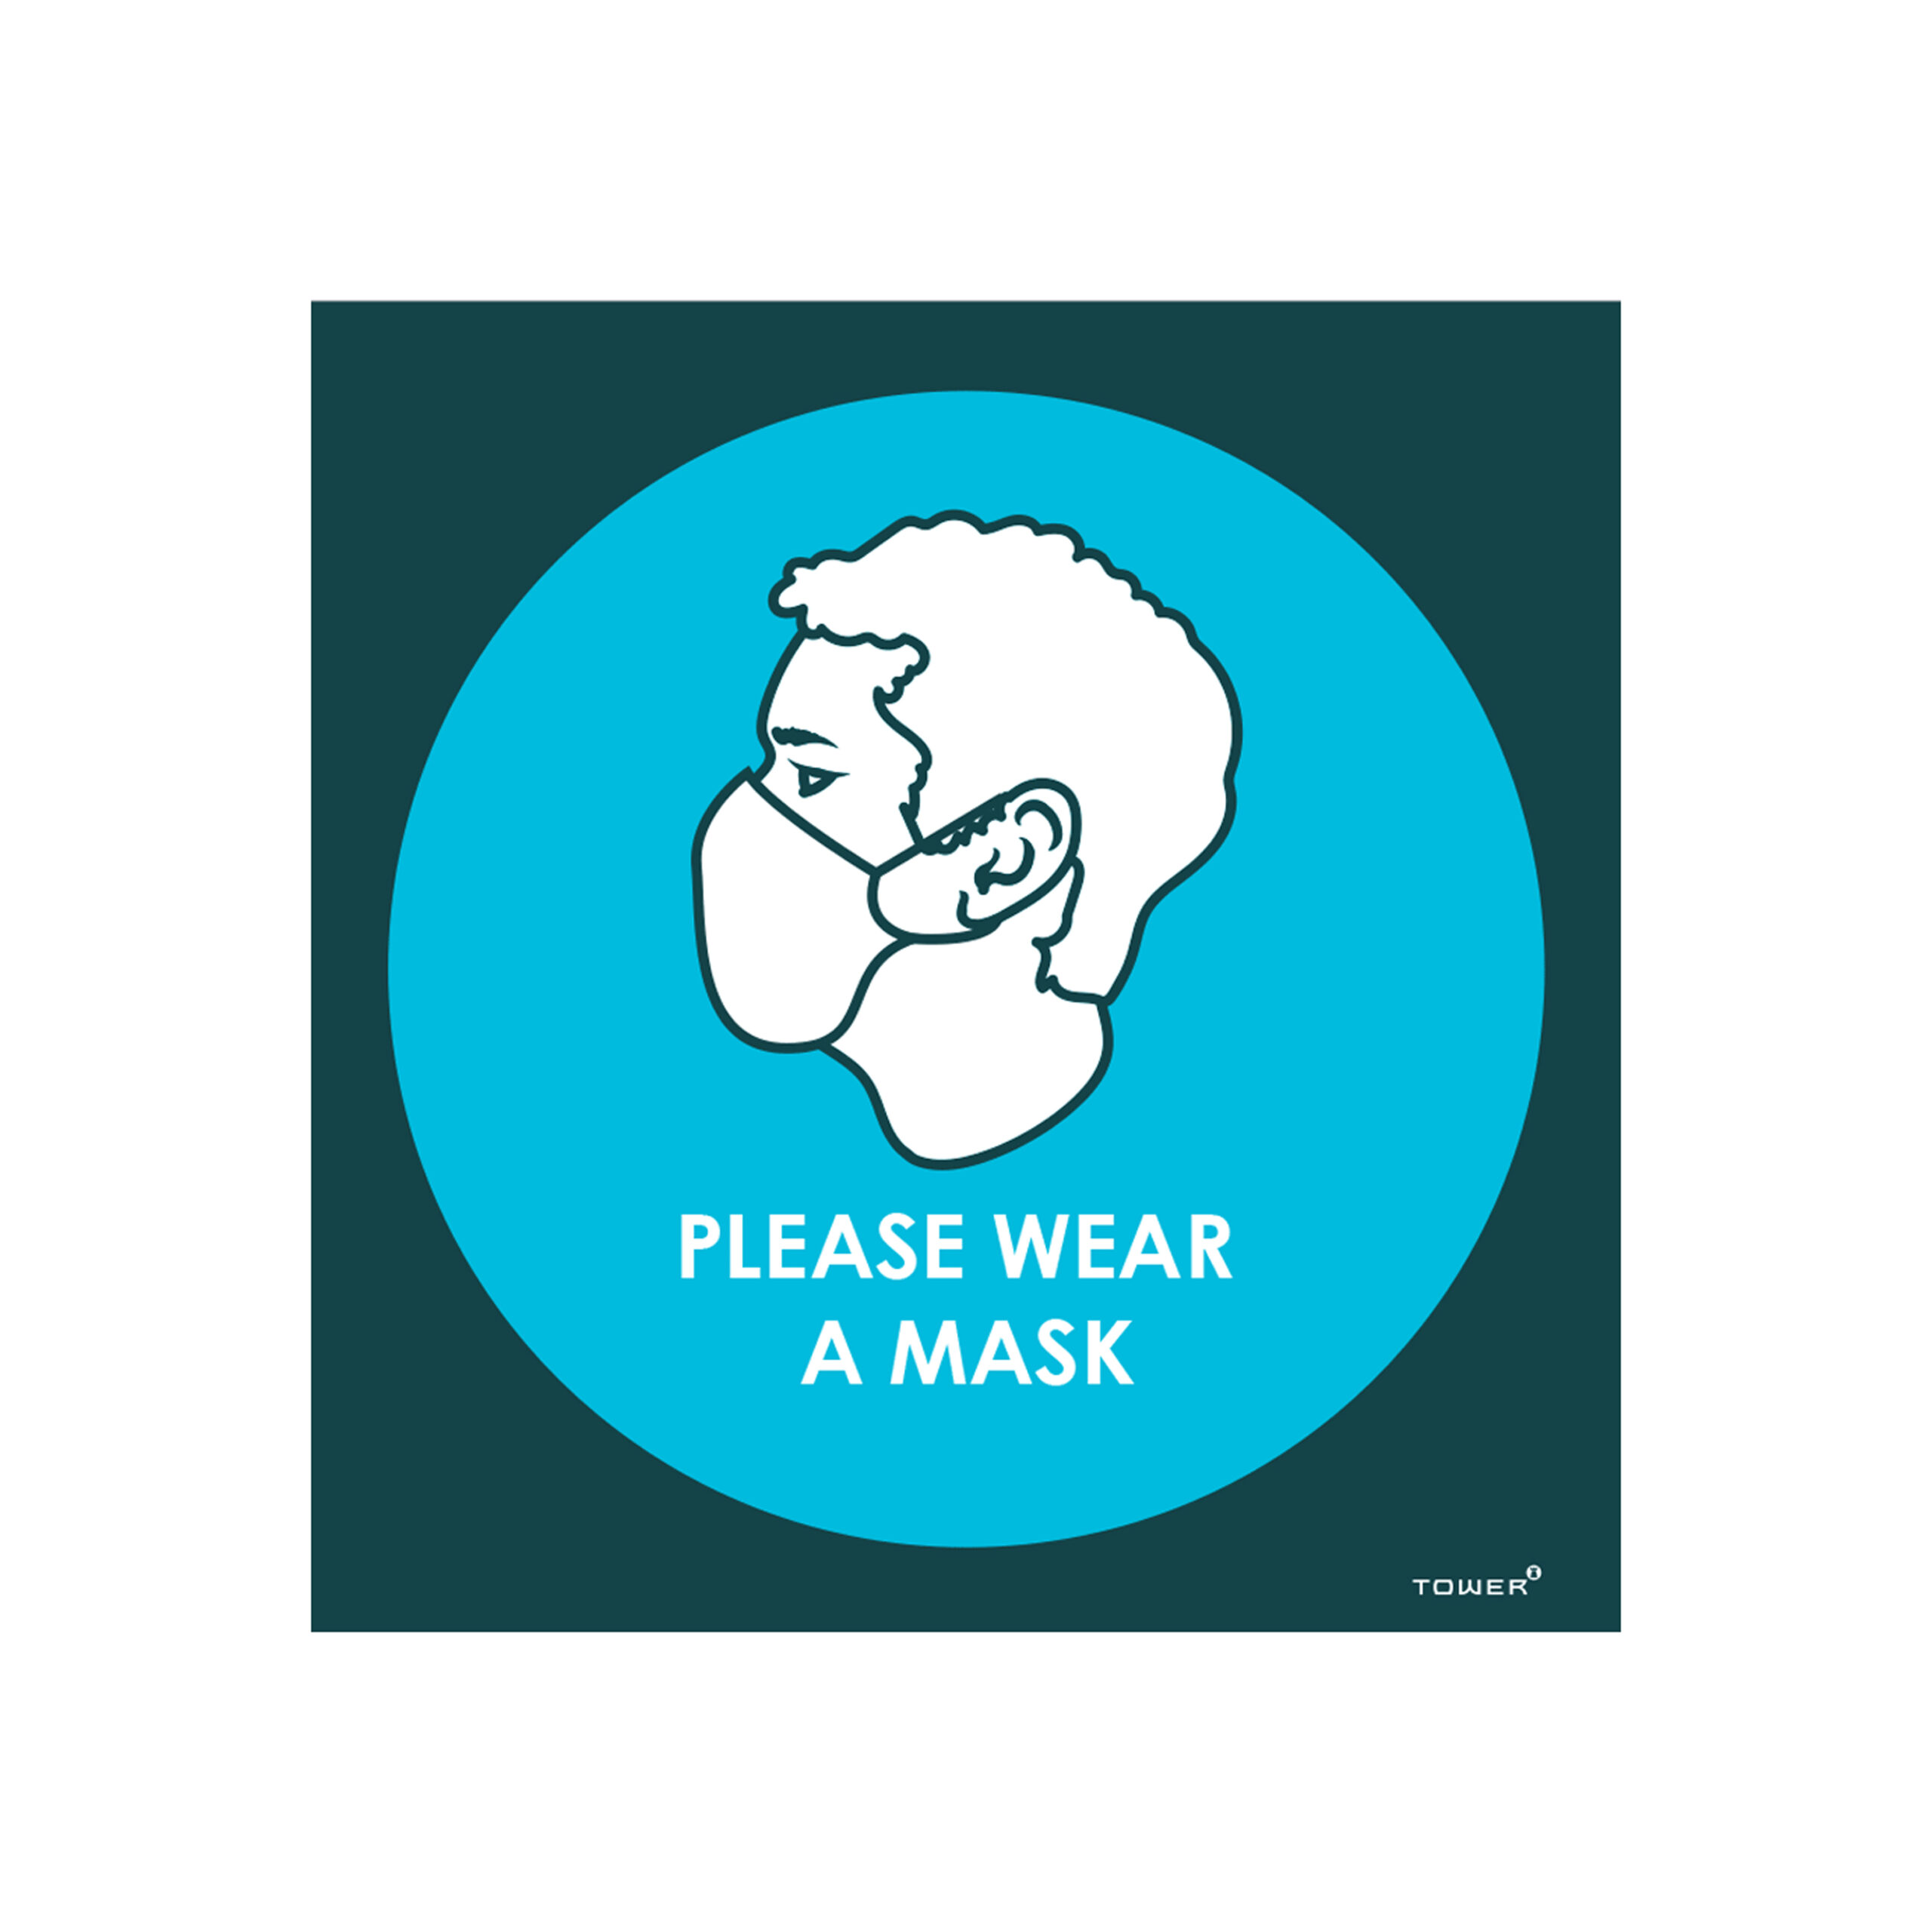 TOWER  "PLEASE
WEAR A MASK"
SIGNAGE 
150x150mm